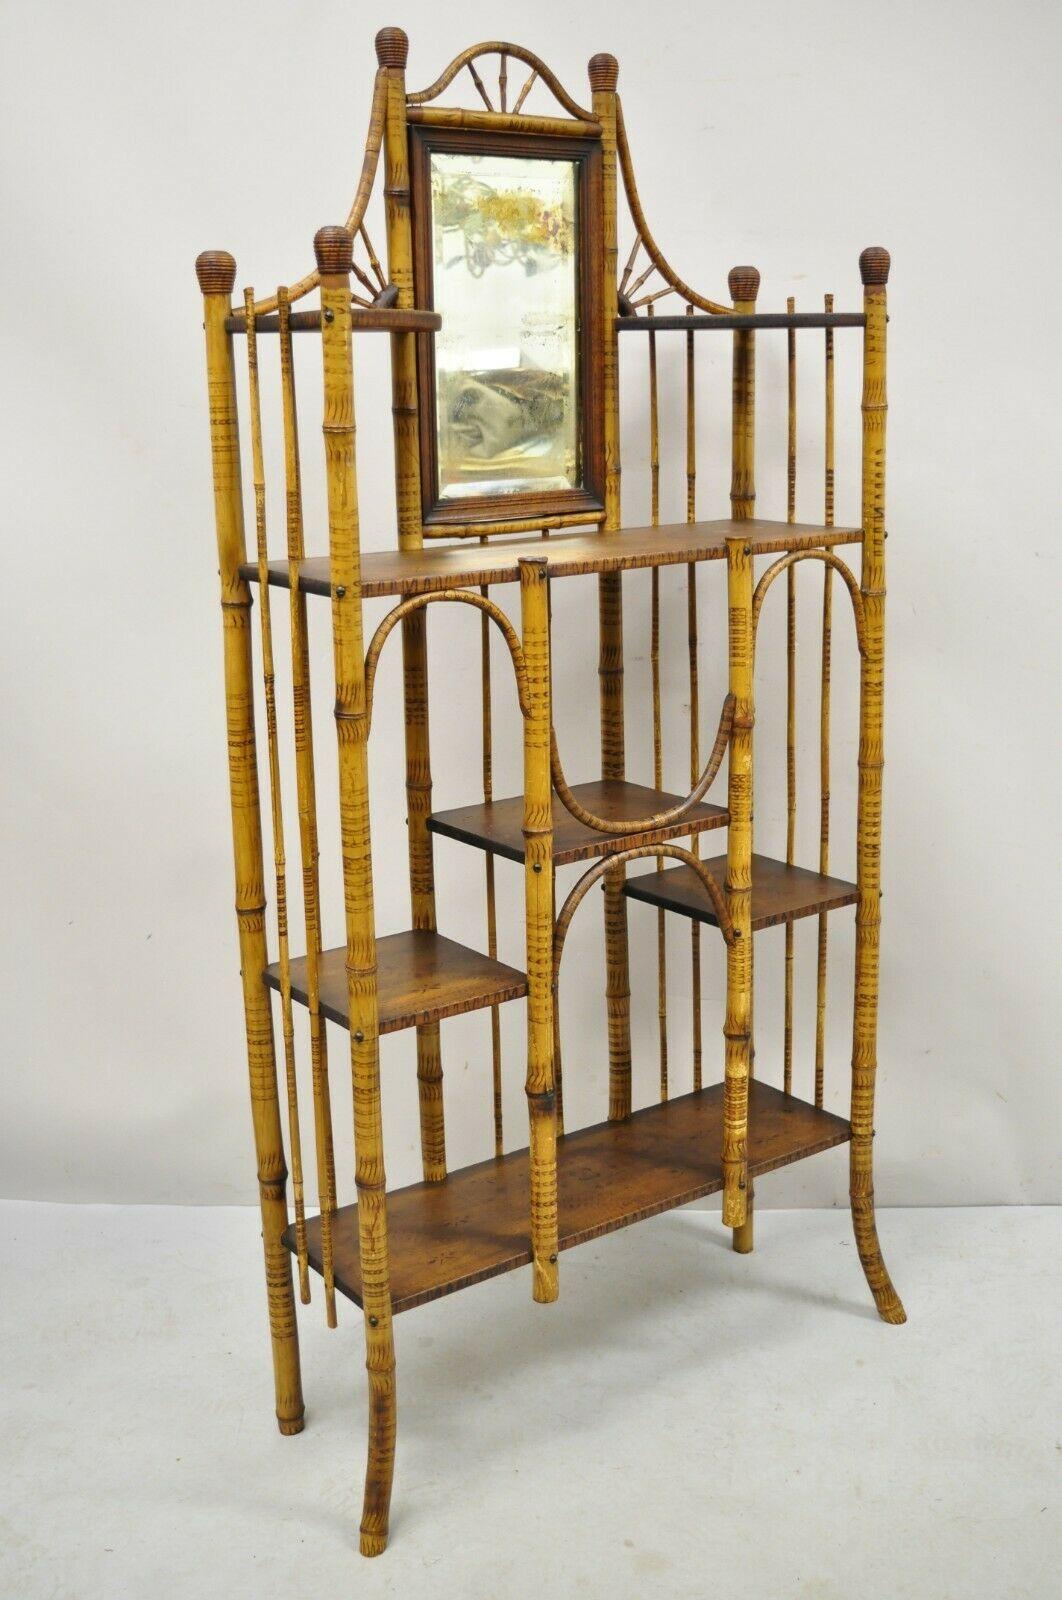 19th C. English Victorian bamboo stick and ball curio shelf display etagere. Item features stunning bamboo construction, distressed 